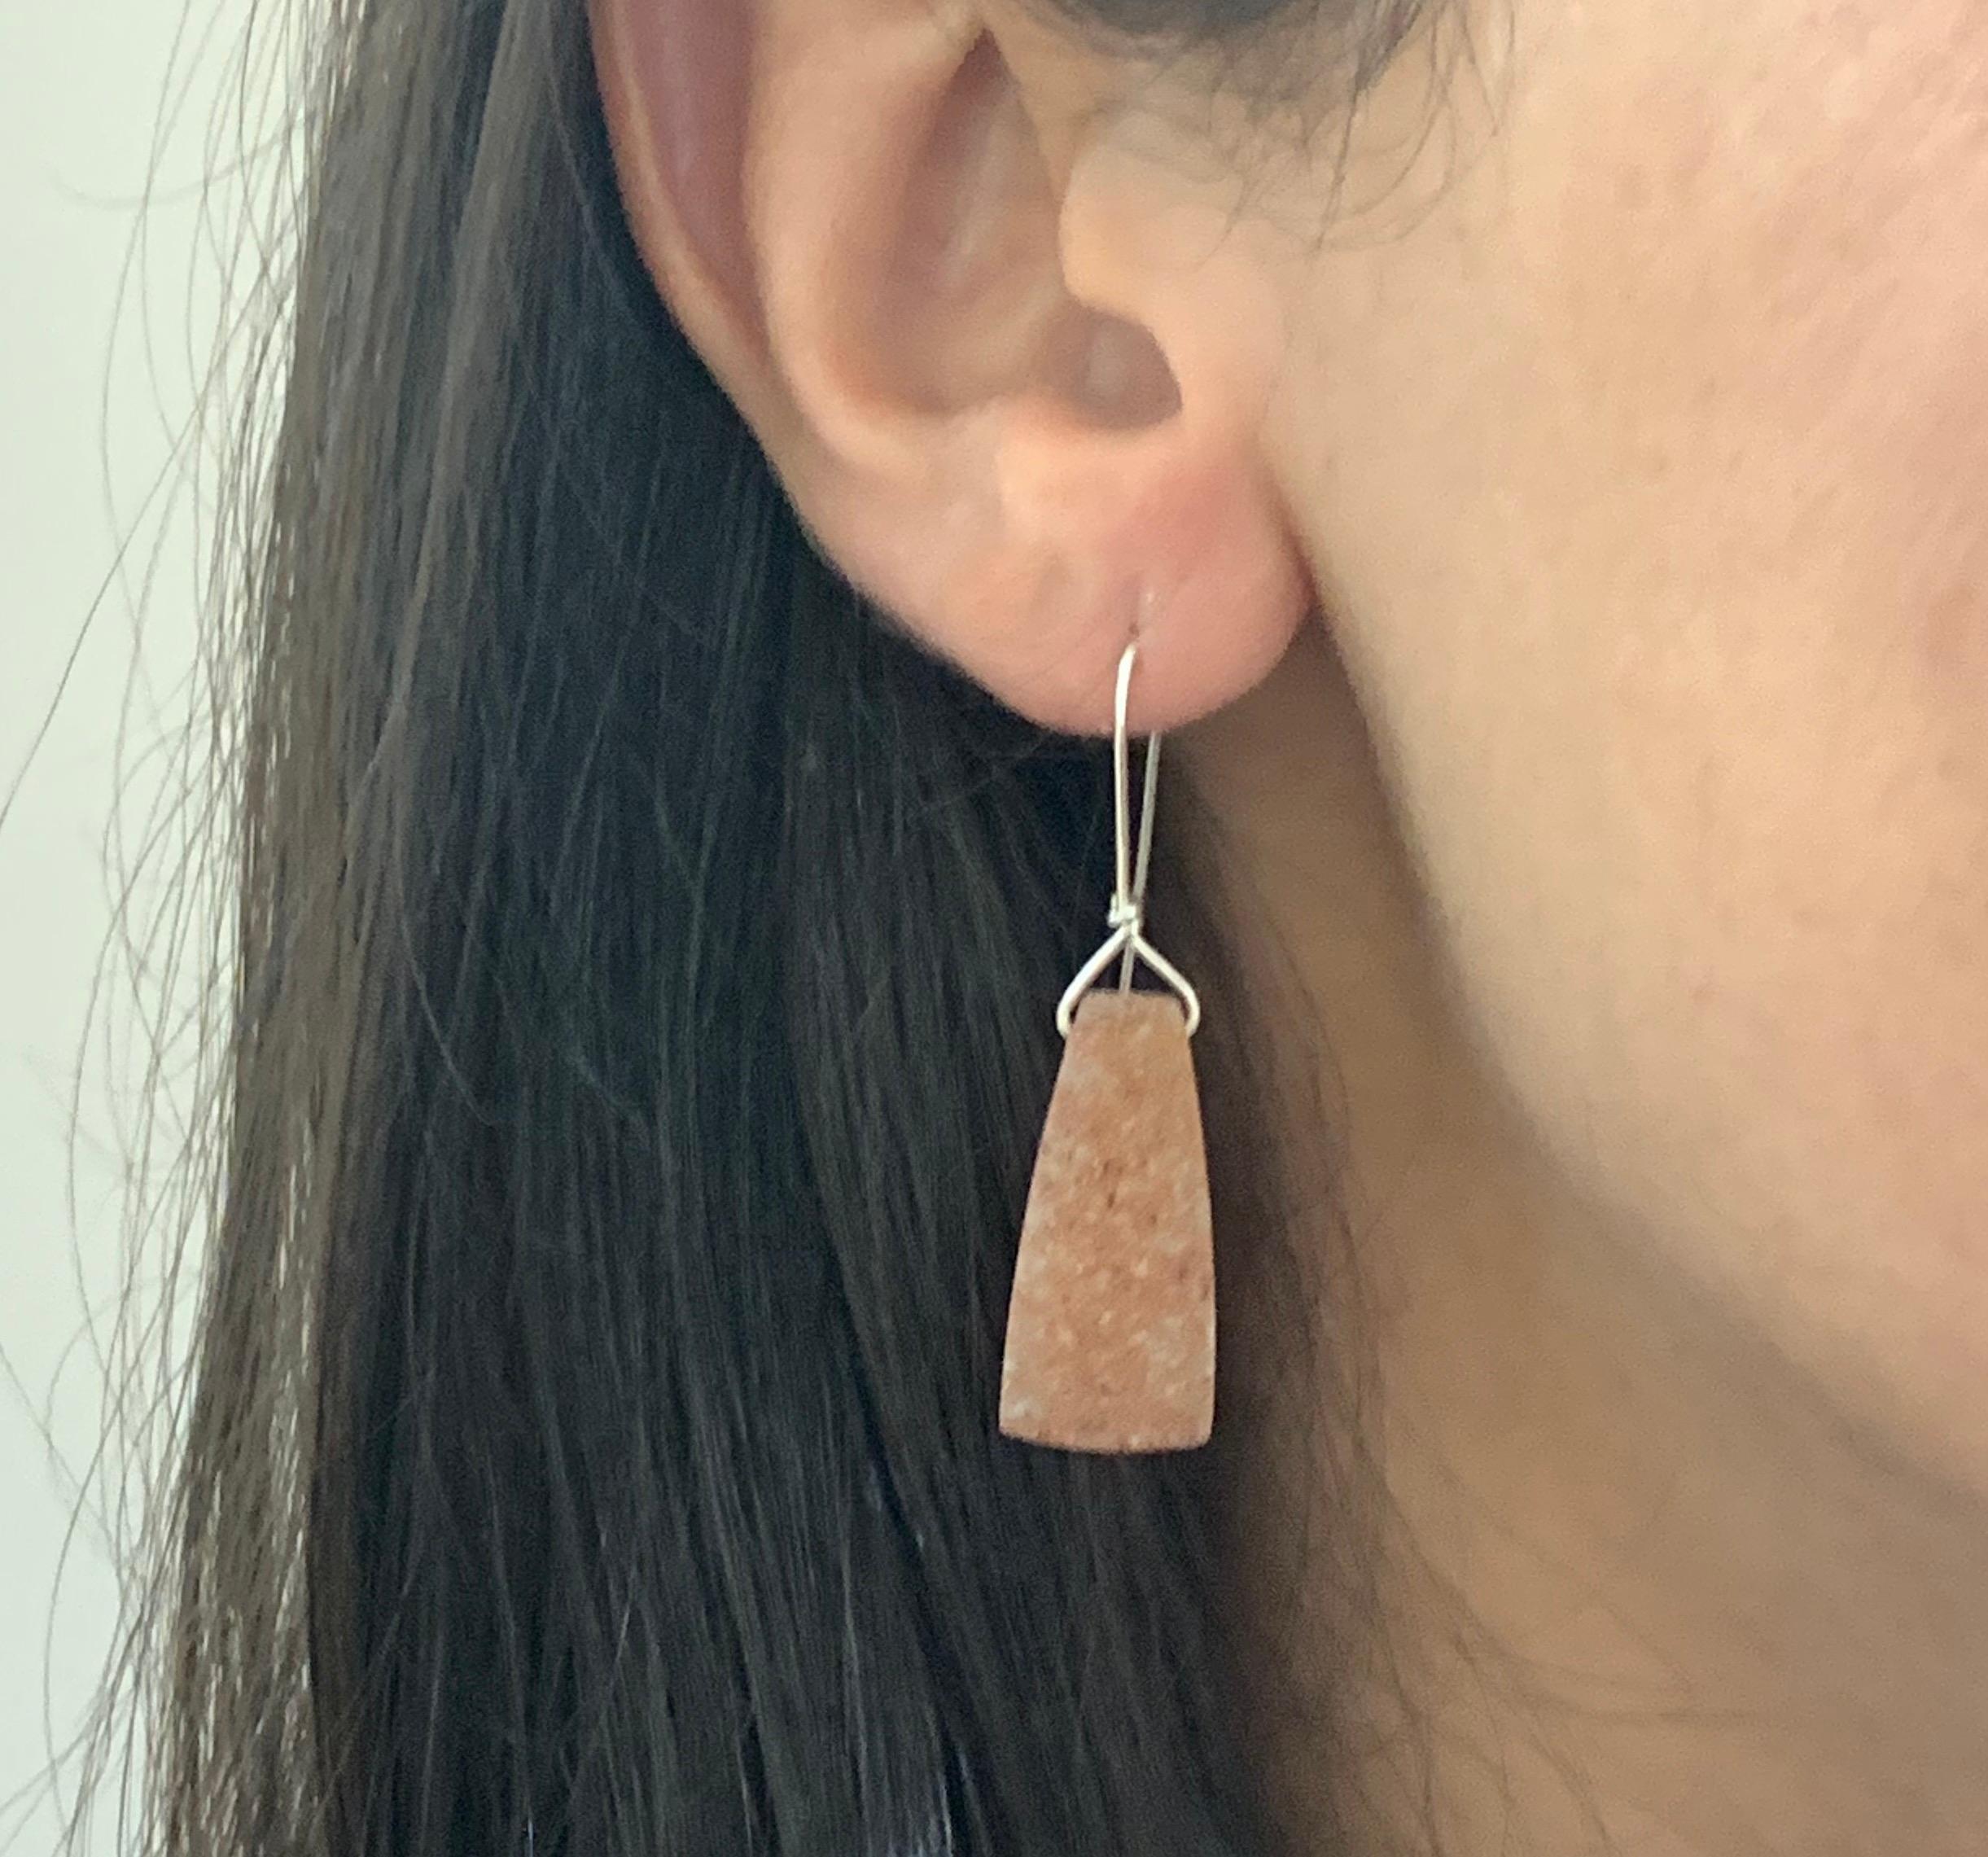 A stunning piece, these Druzy stones are a perfect match in quality and color. These earrings will have all eyes on you!

Material: Sterling Silver
Center Stone Details: Two Pear Shaped Druzys